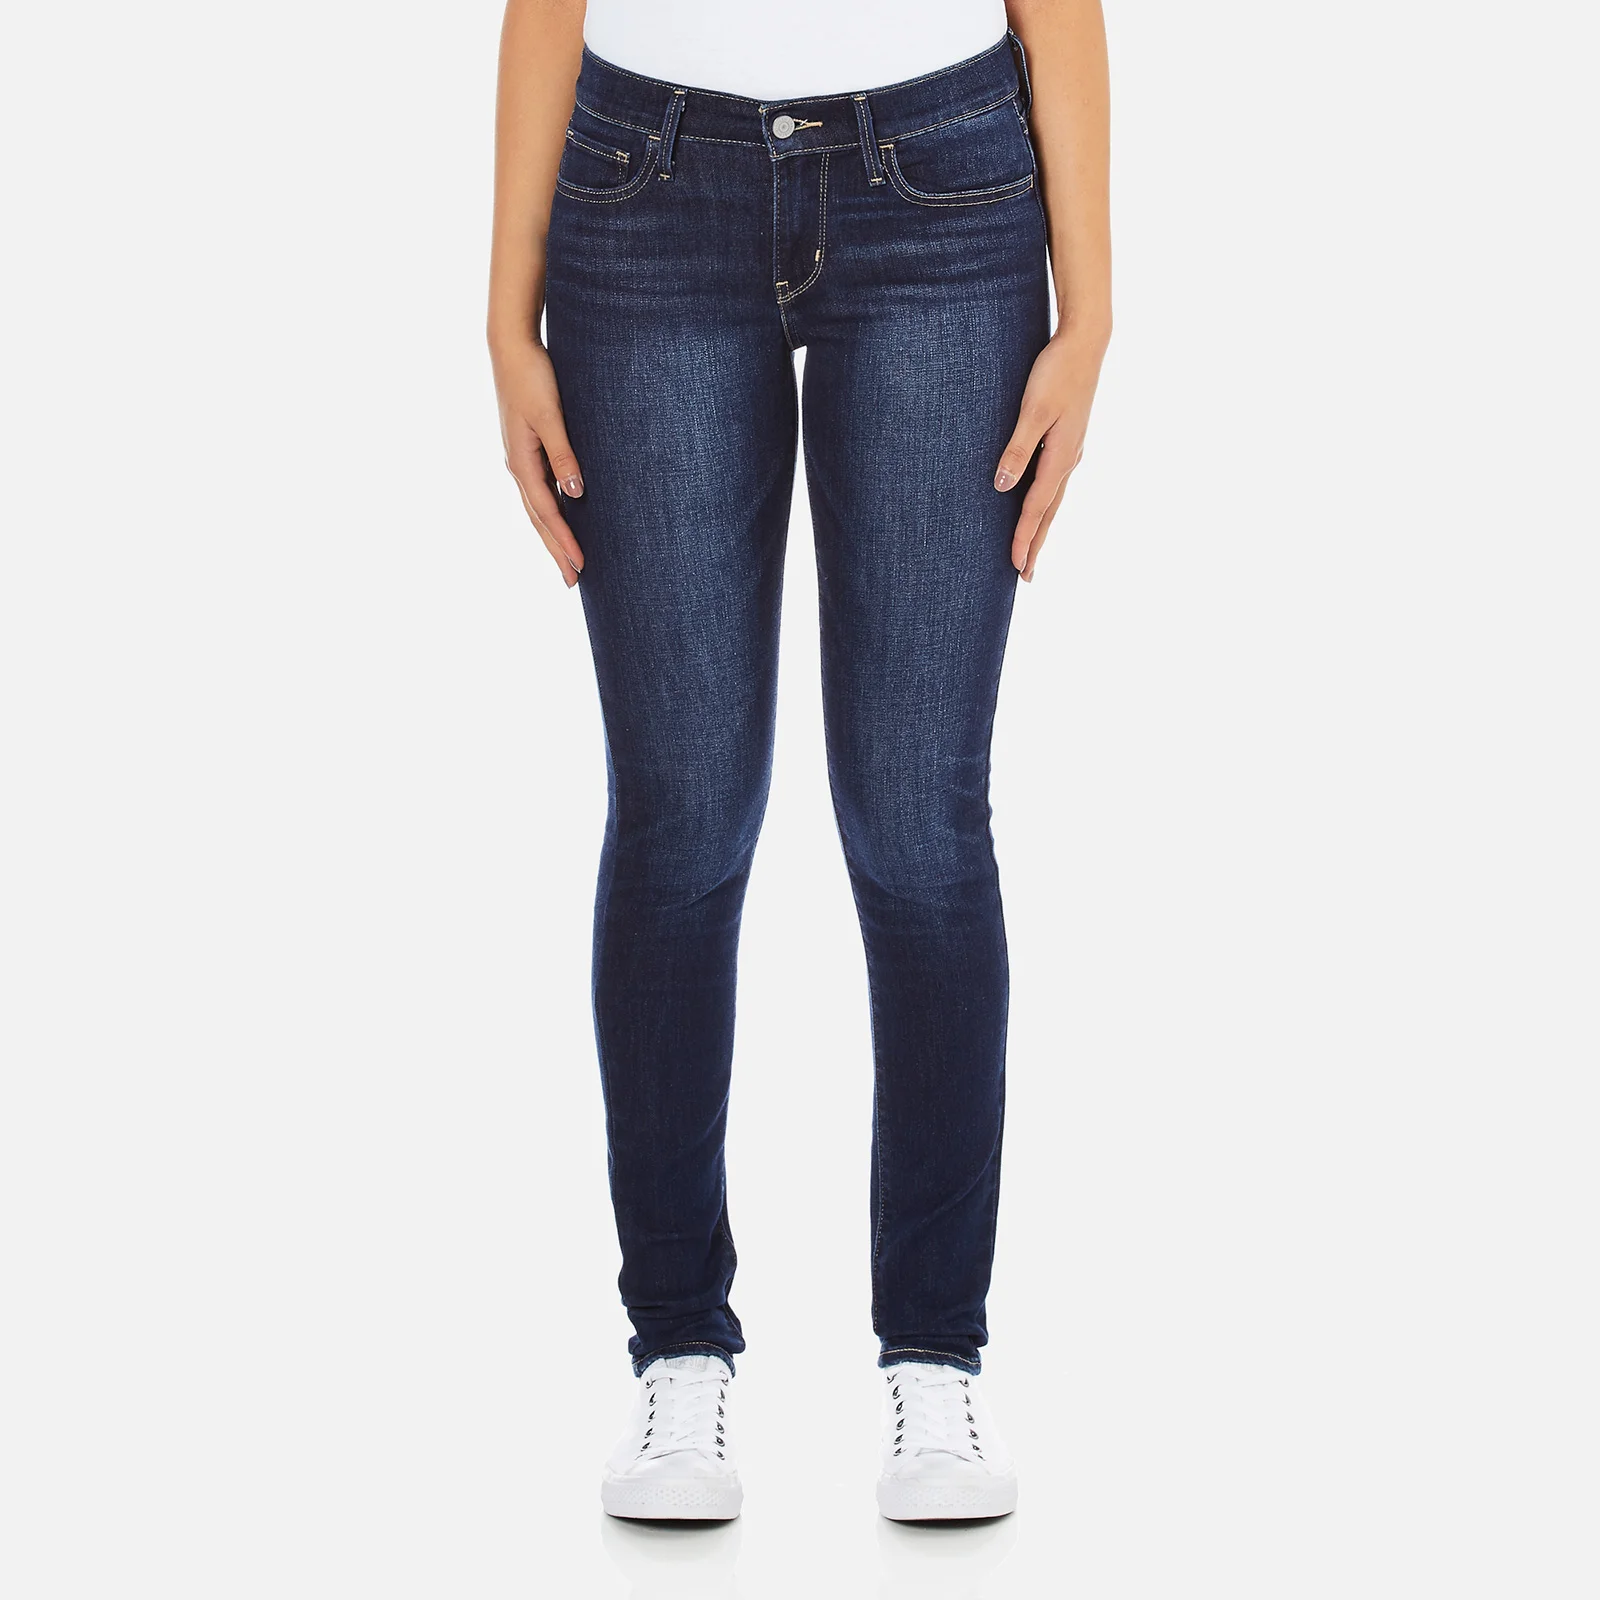 Levi's Women's 710 Super Skinny Fit Jeans - Amber Night Image 1